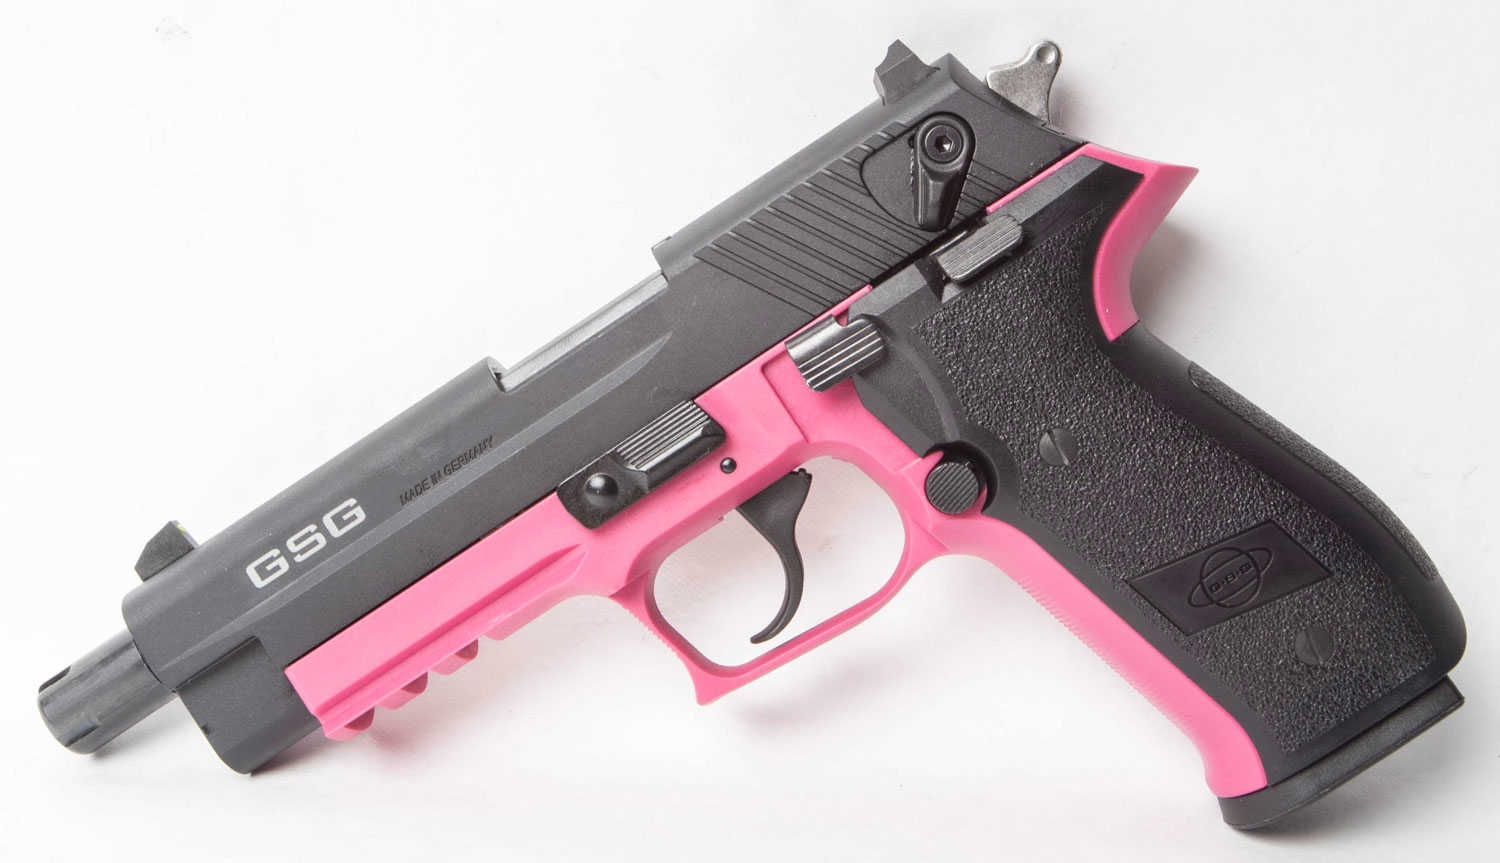 ATI GSG FireFly Semi Automatic Pistol 22 Long Rifle 4.9" Barrel 10 Round Capacity Black Polymer Grip With Pink Frame